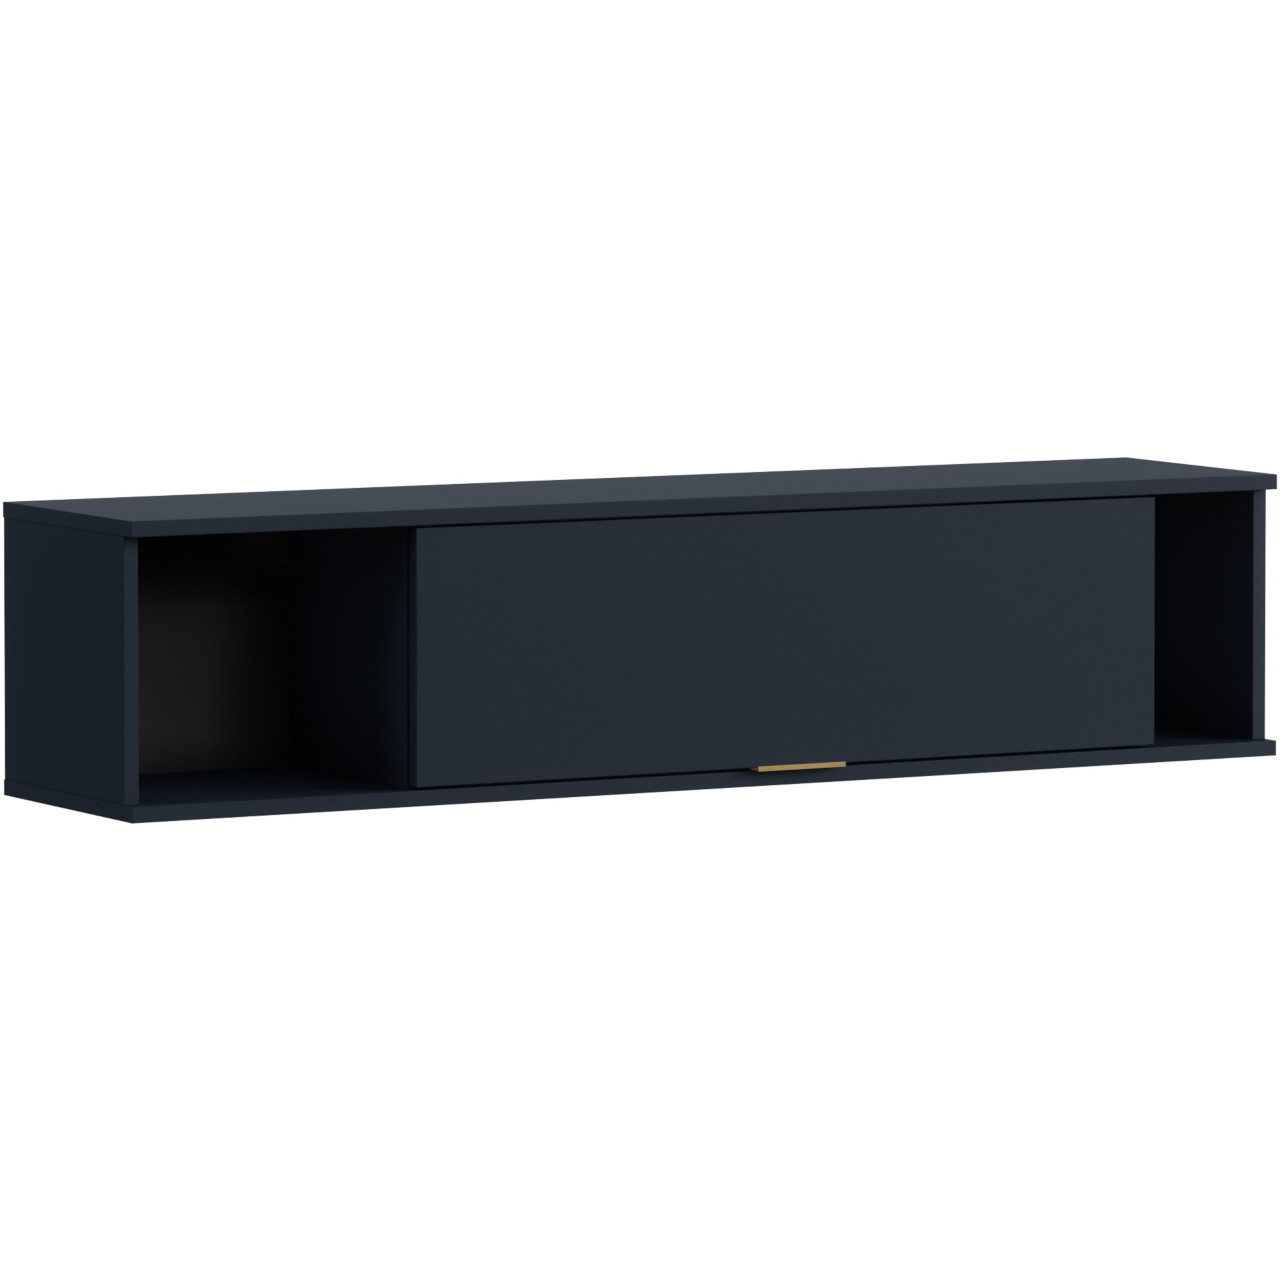 Wall Cabinet PULA PL08 navy blue